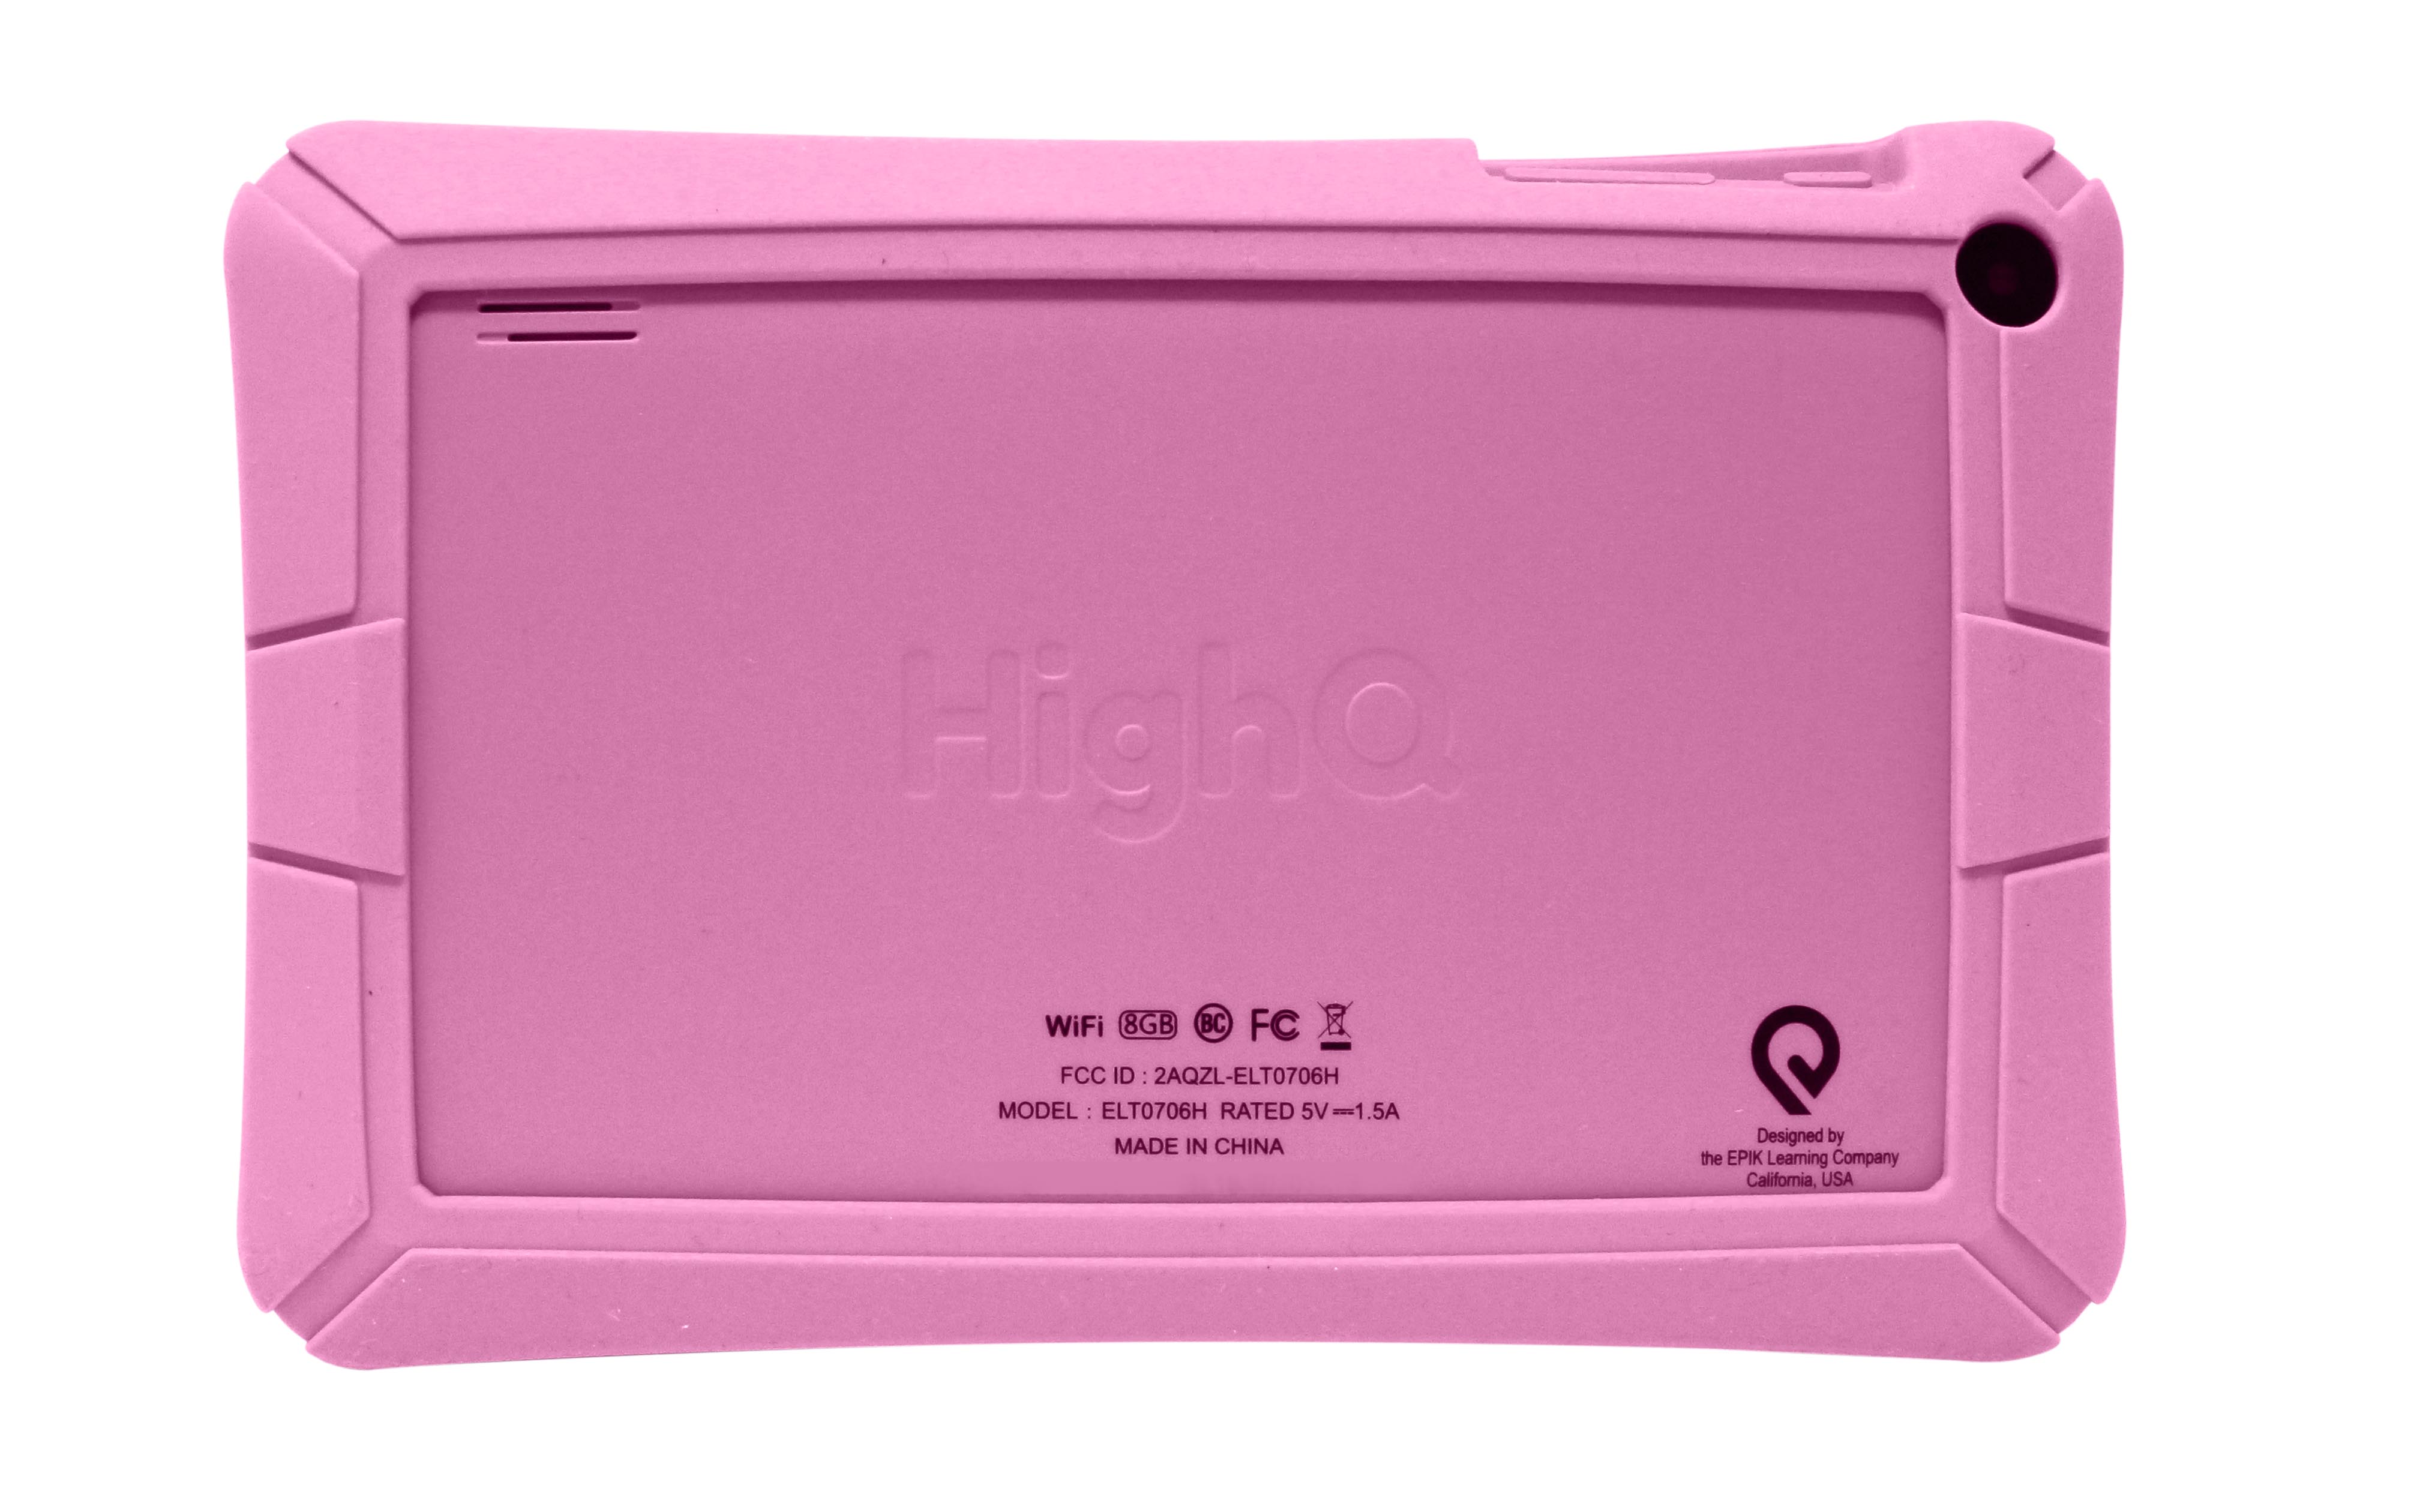 HighQ 7" Learning Tab Jr. featuring Kidomi, Gel Case Included, Quad Core Processor, 8GB Storage, Android 8.1 Go Edition, Dual Cameras, Kidomi Free Trial Included, Pink - image 2 of 6